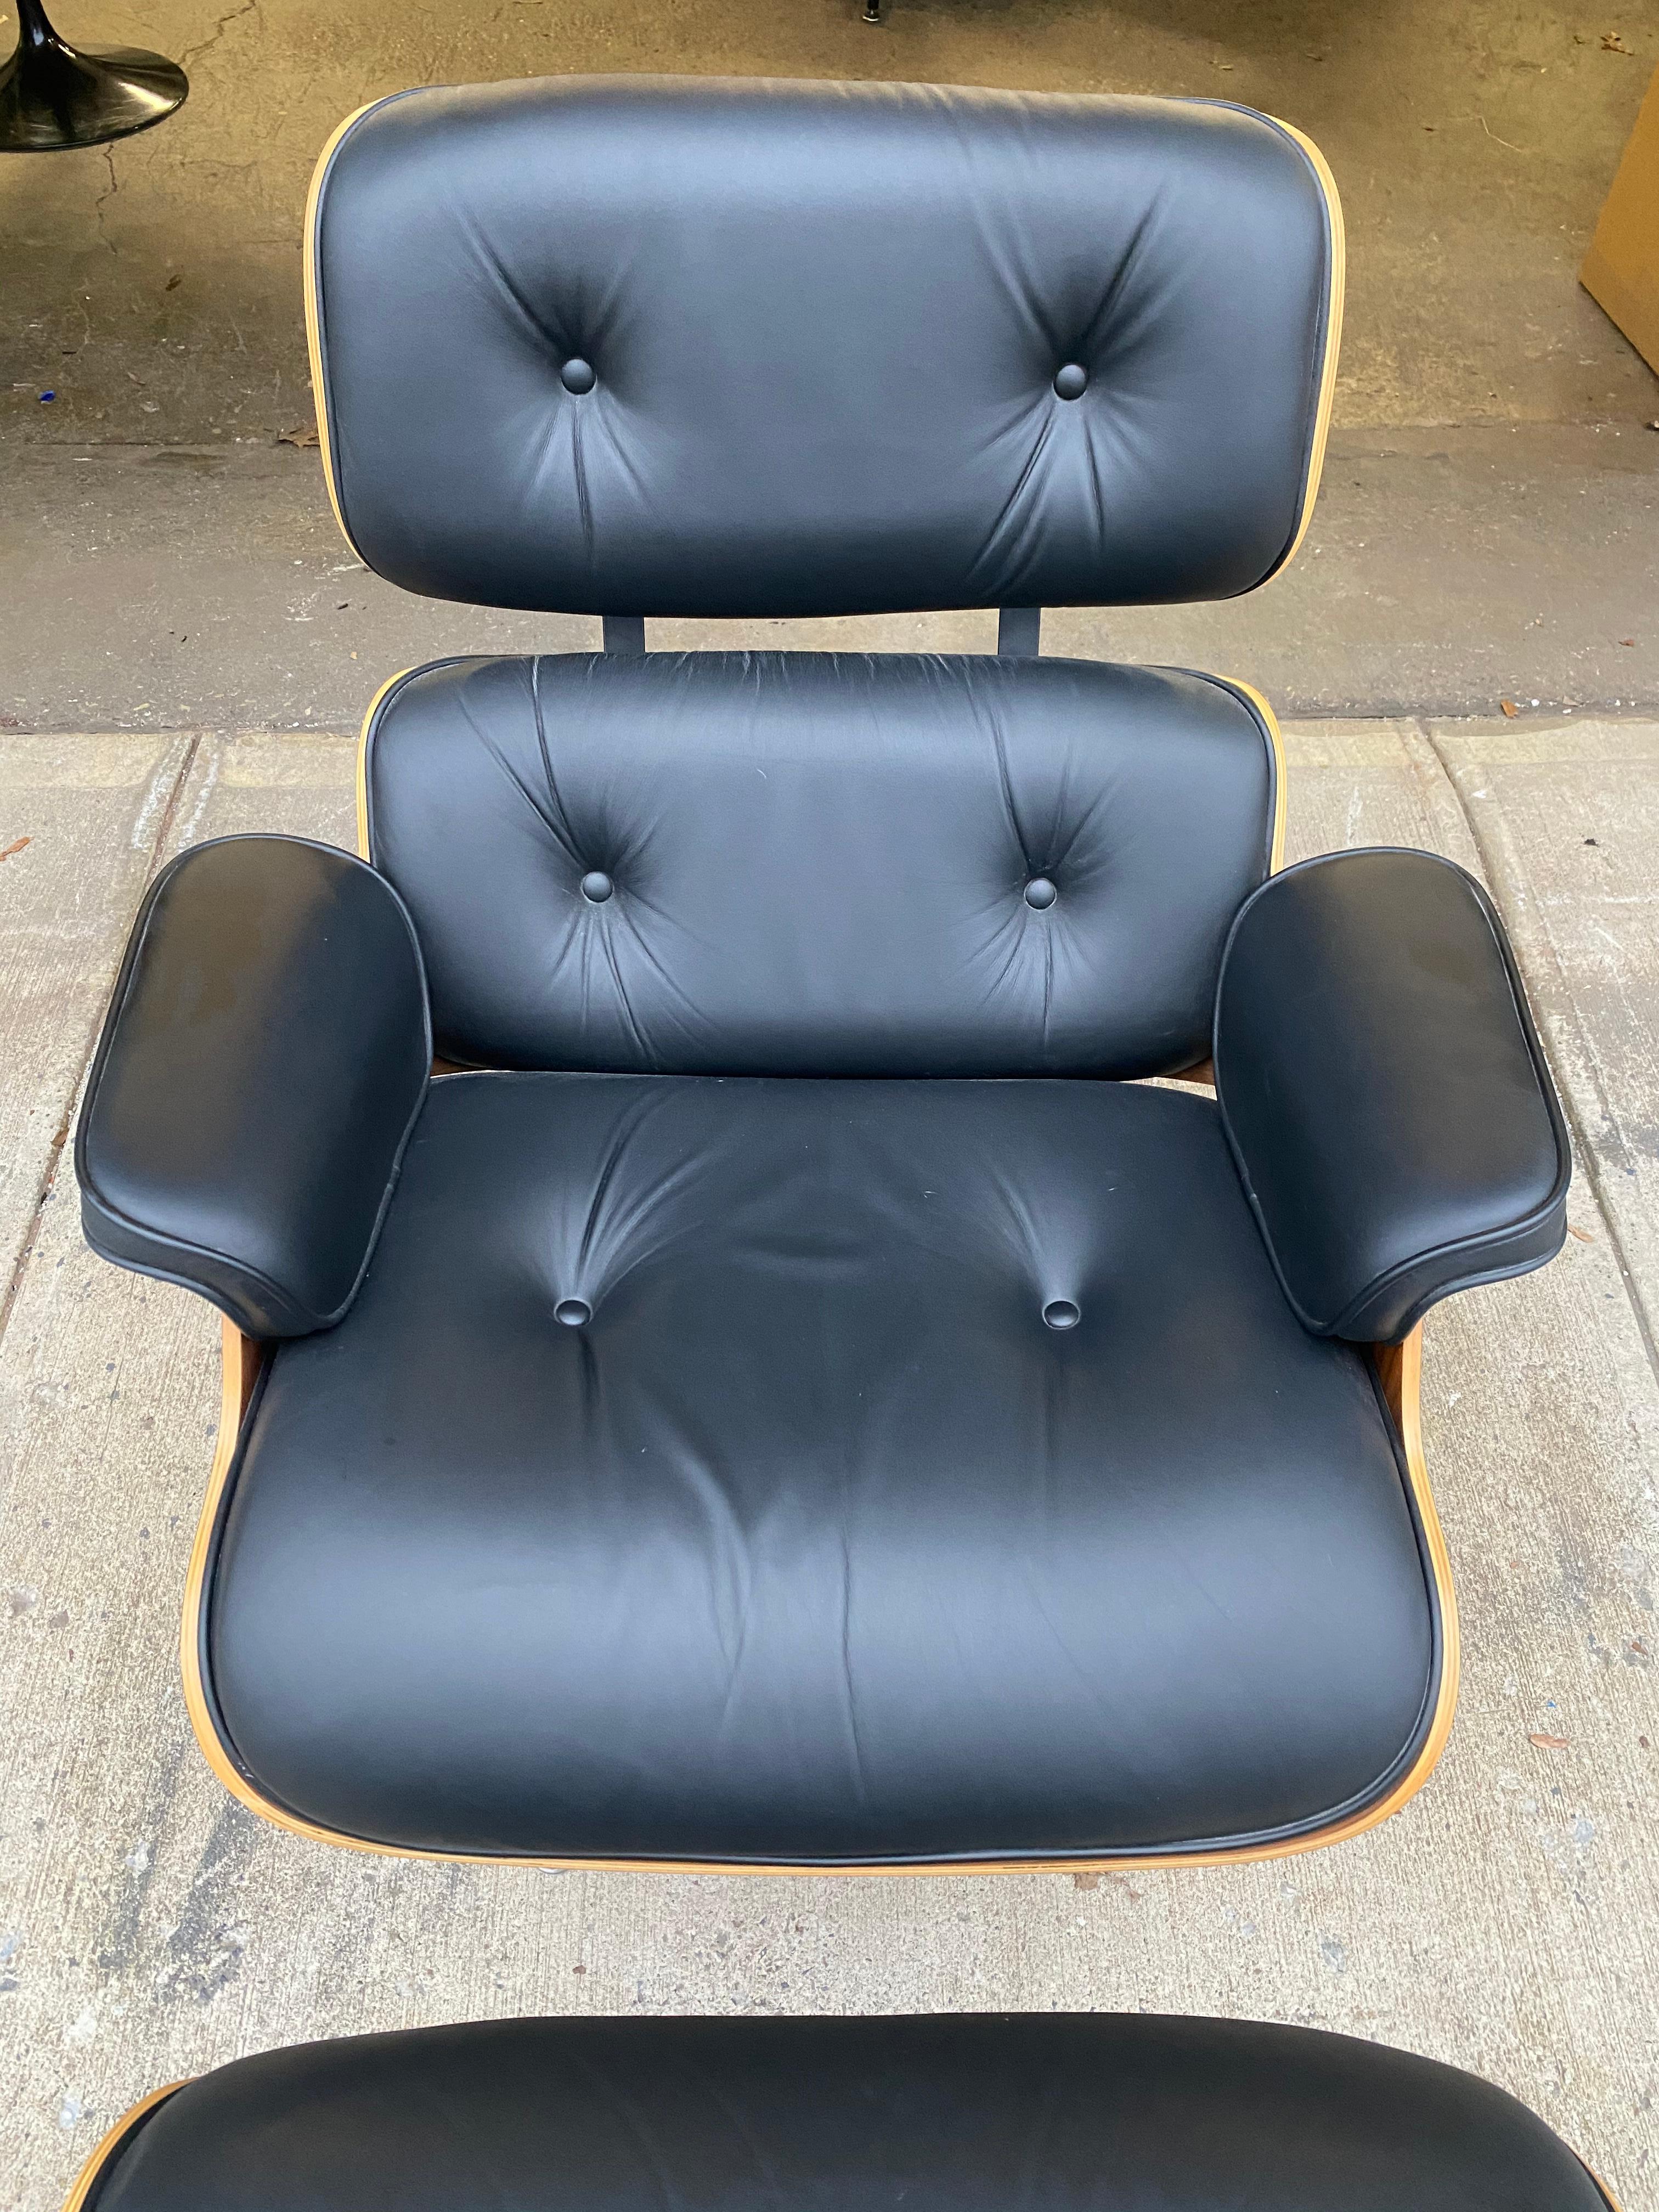 Gorgeous Classic Herman Miller Eames lounge chair and ottoman. Executed in original black leather and walnut shells. This chair was hardly used and the leather is like new. Signed and guaranteed authentic. Beautiful walnut tones and grain detail.